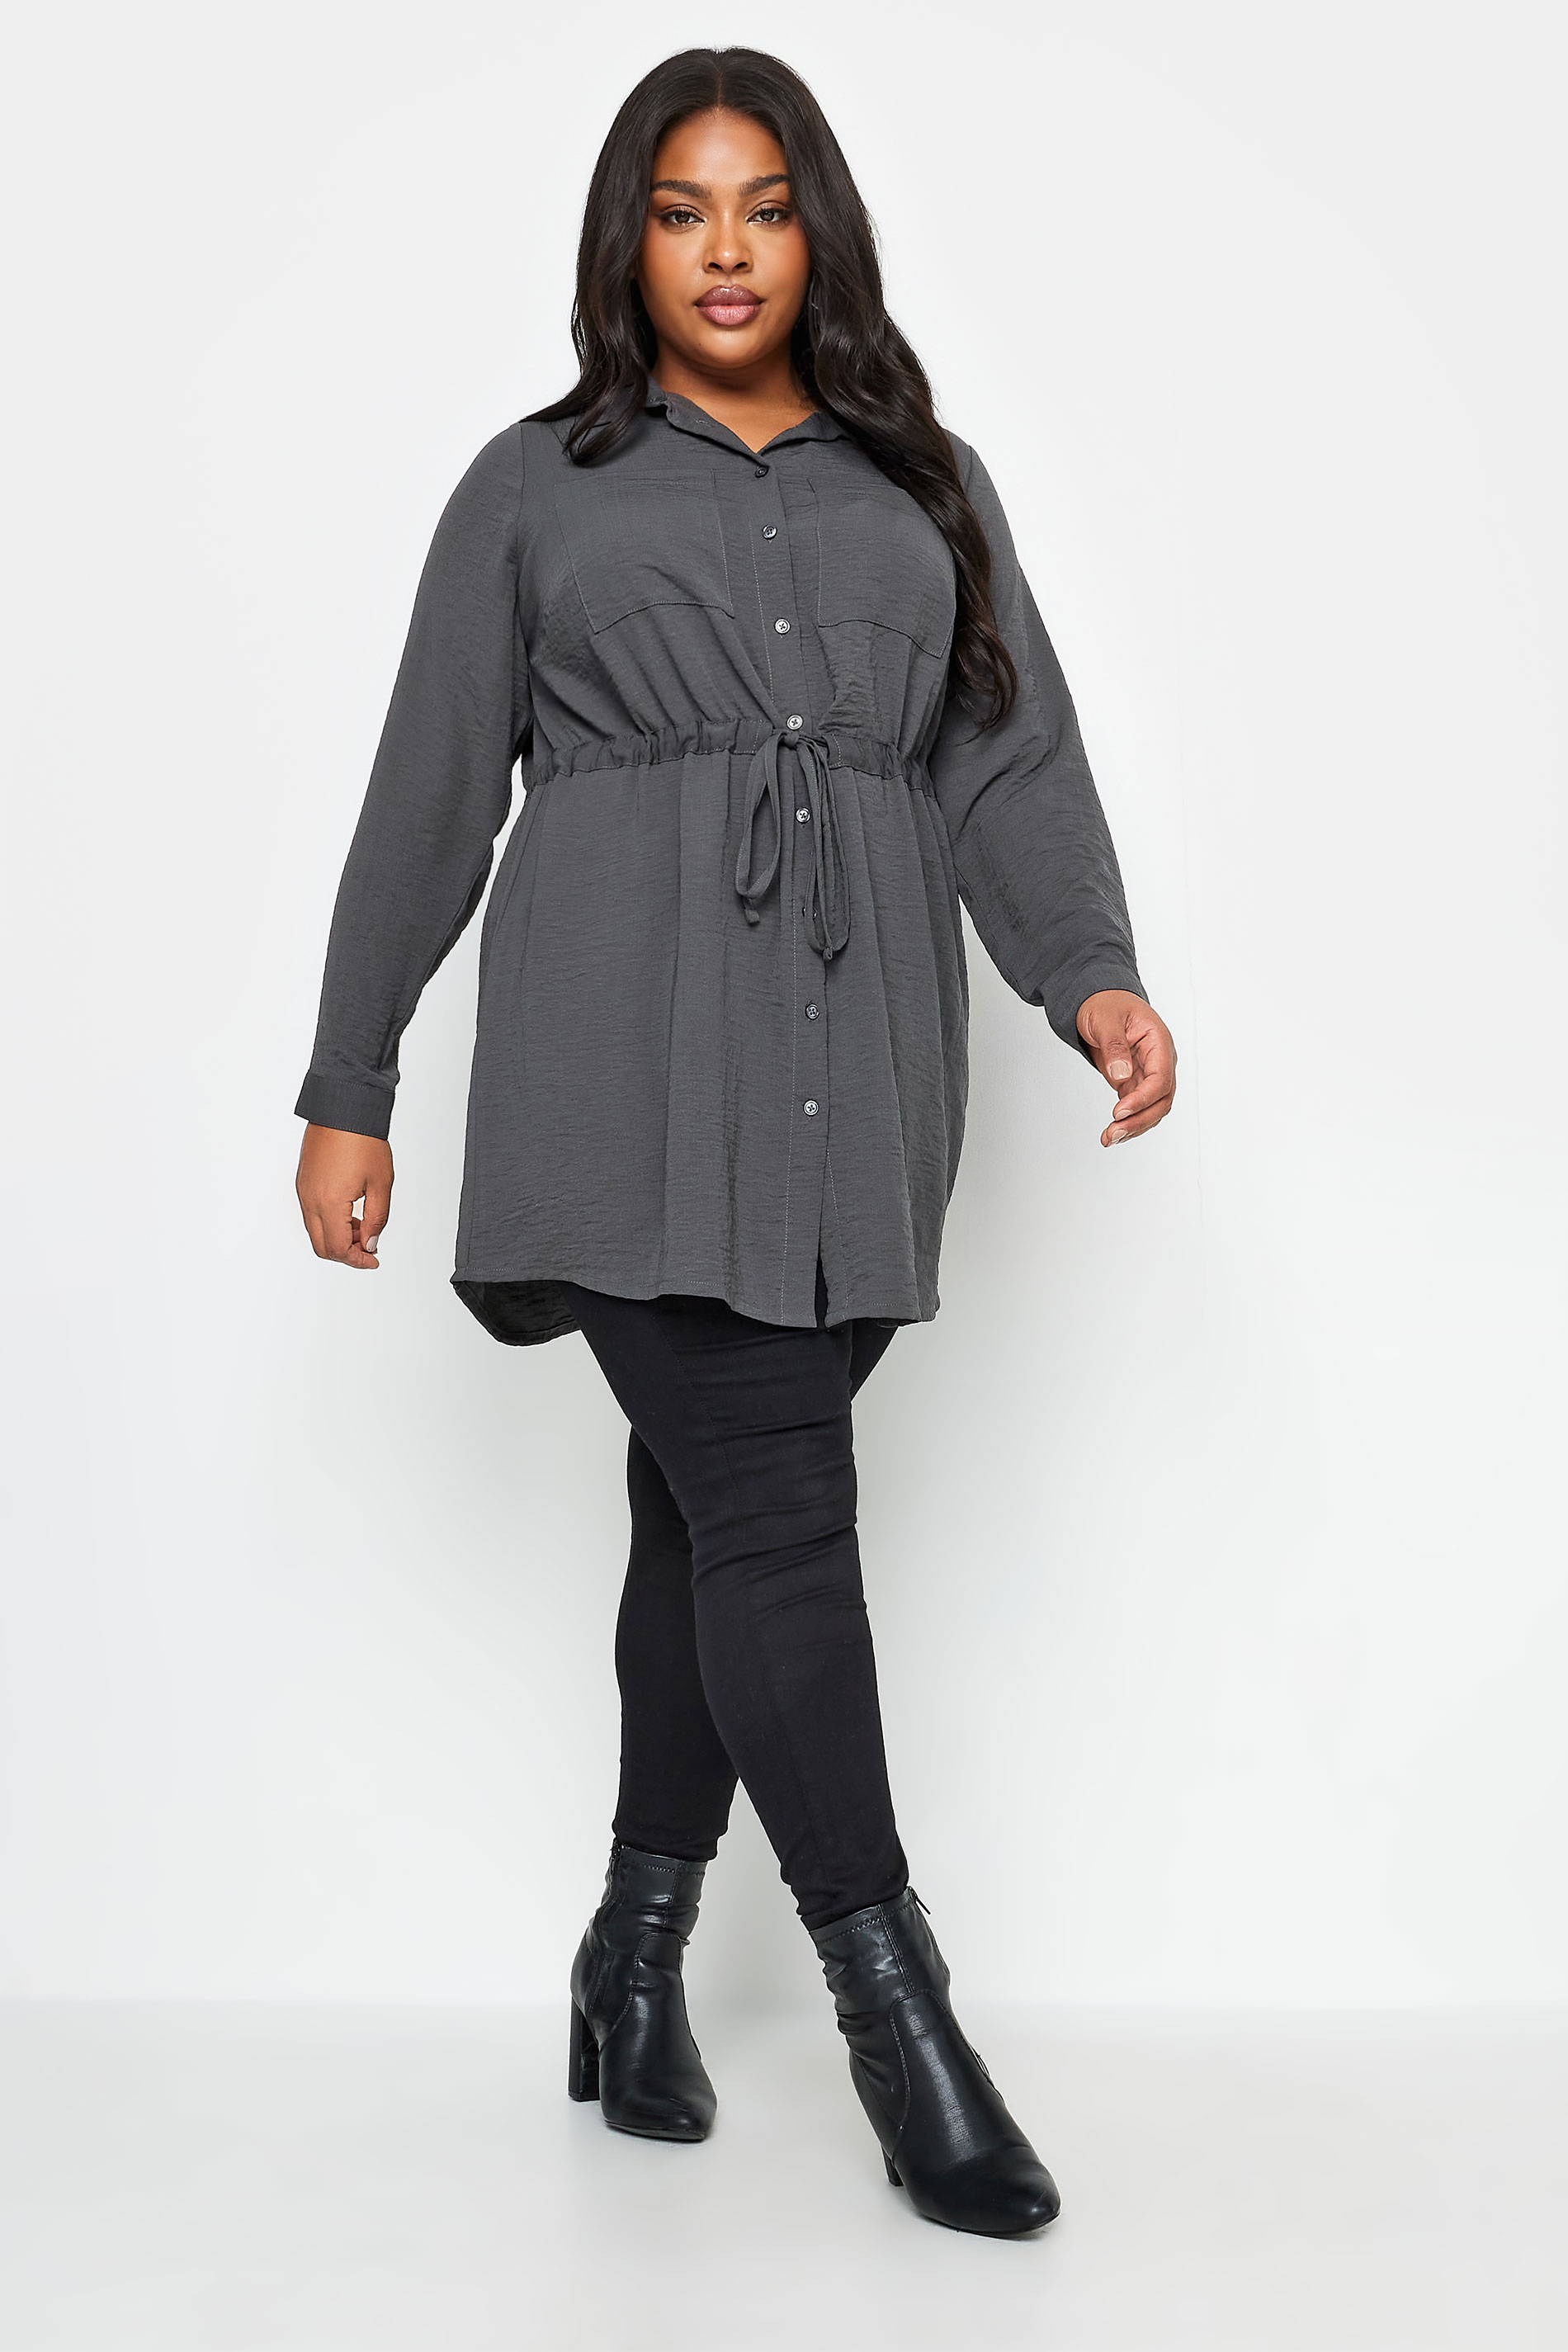 YOURS Plus Size Charcoal Grey Utility Tunic Shirt | Yours Clothing 3